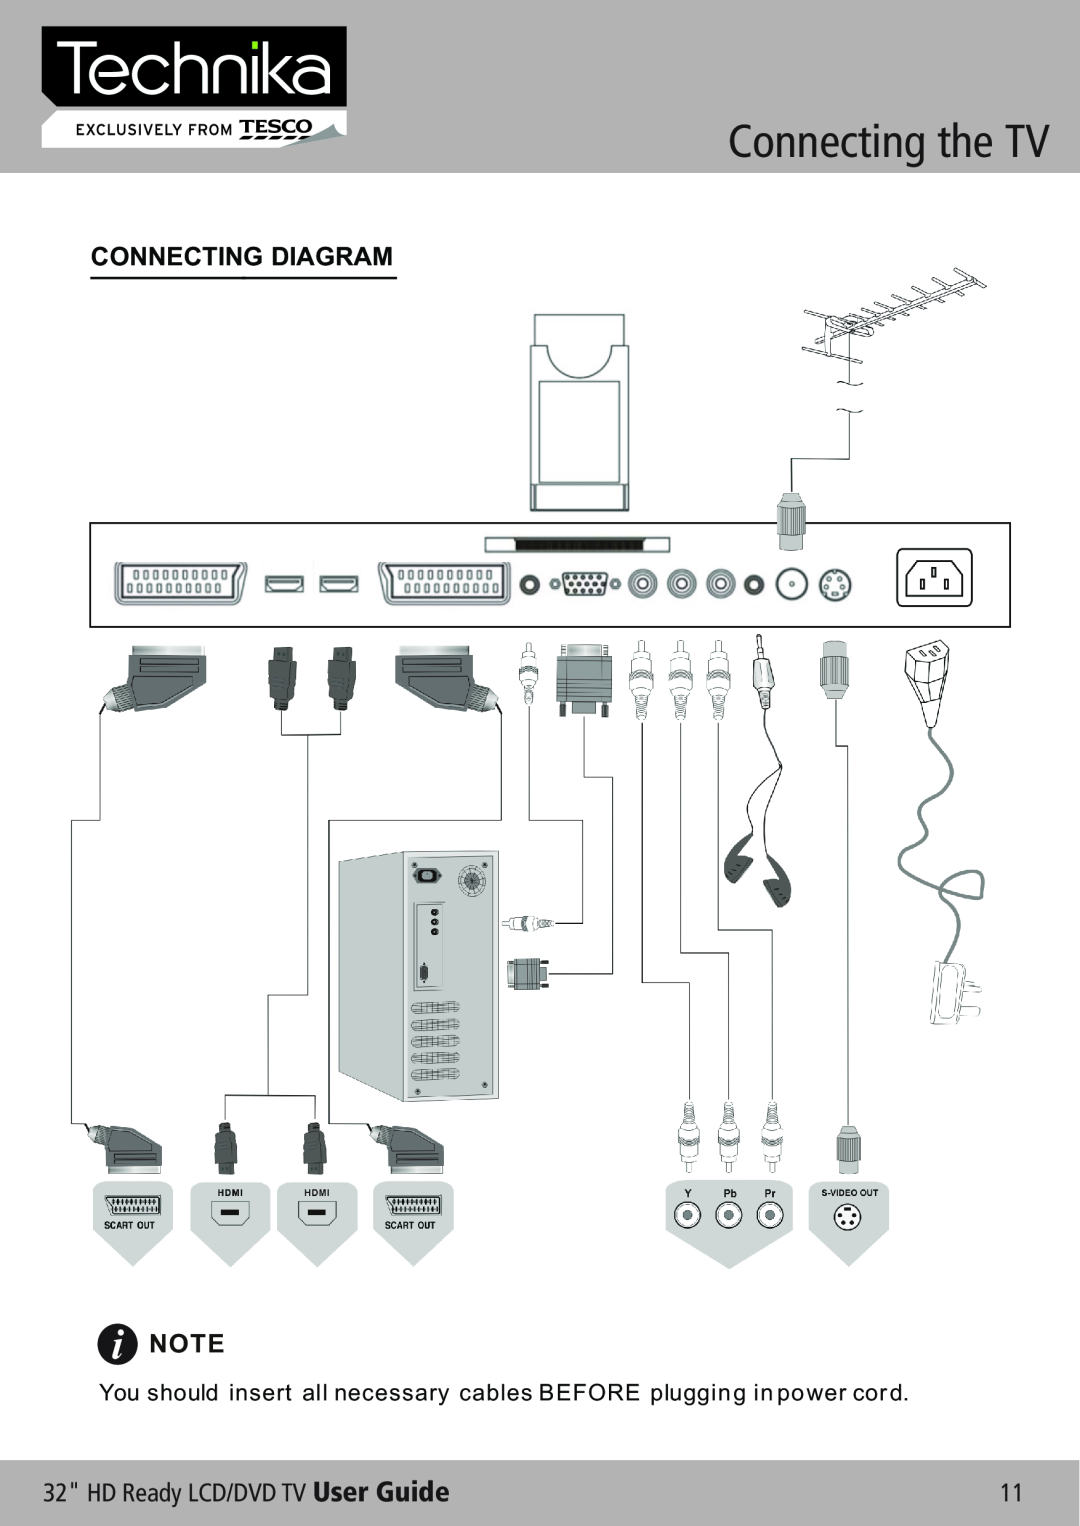 Technika 32-612 manual Connecting the TV, Connecting Diagram, HD Ready LCD/DVD TV User Guide 